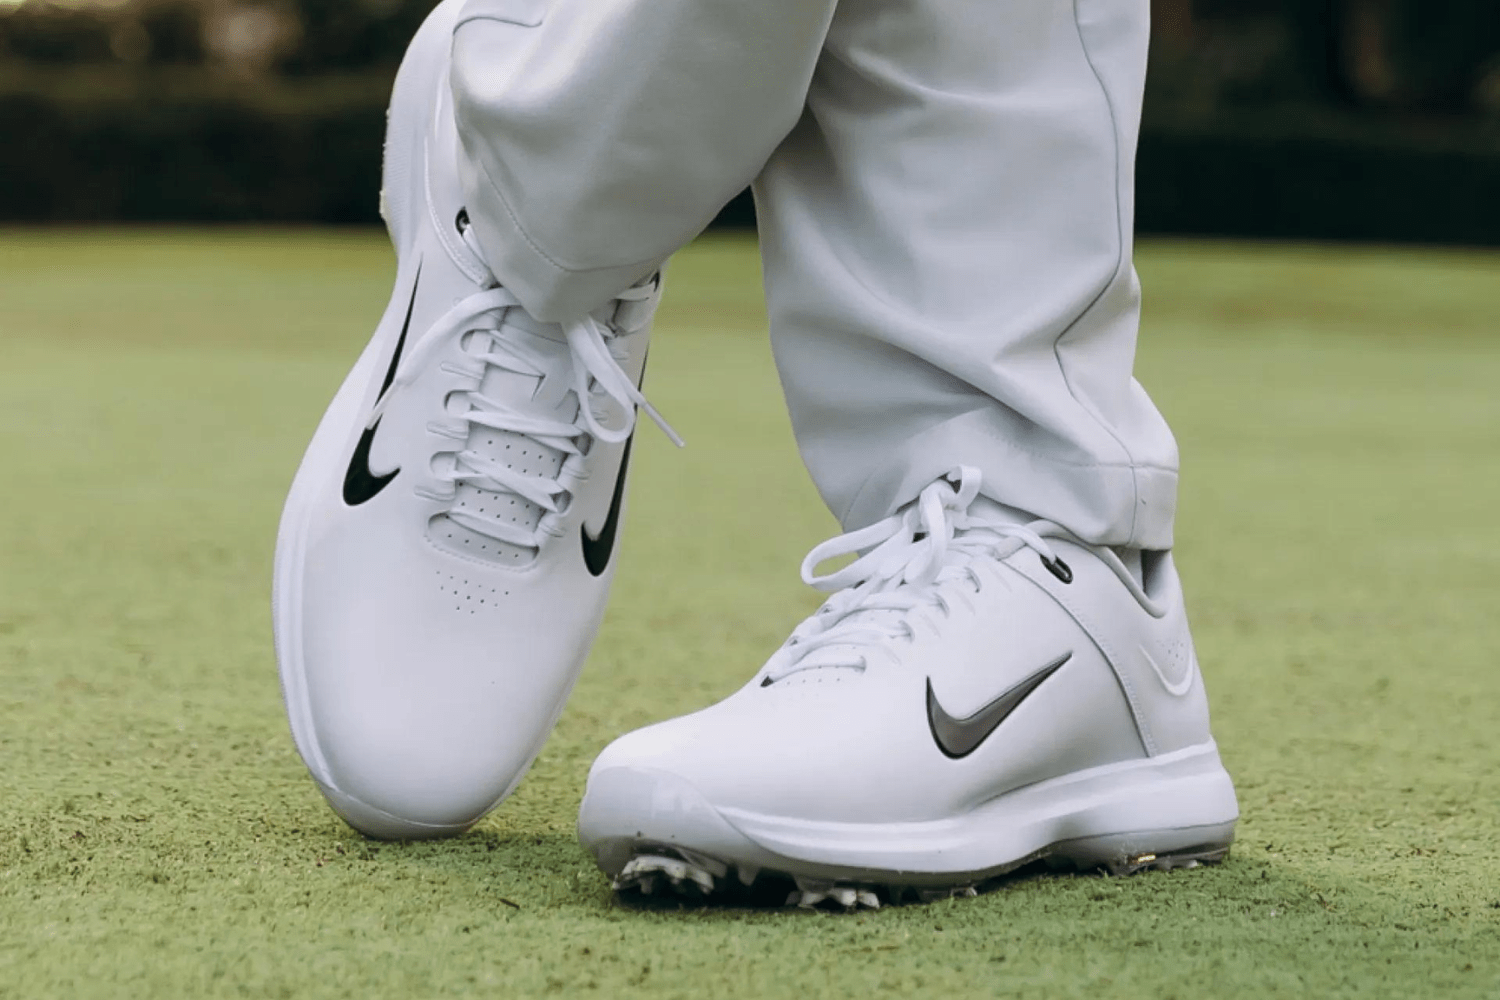 What you need to know about Nike Golf releases